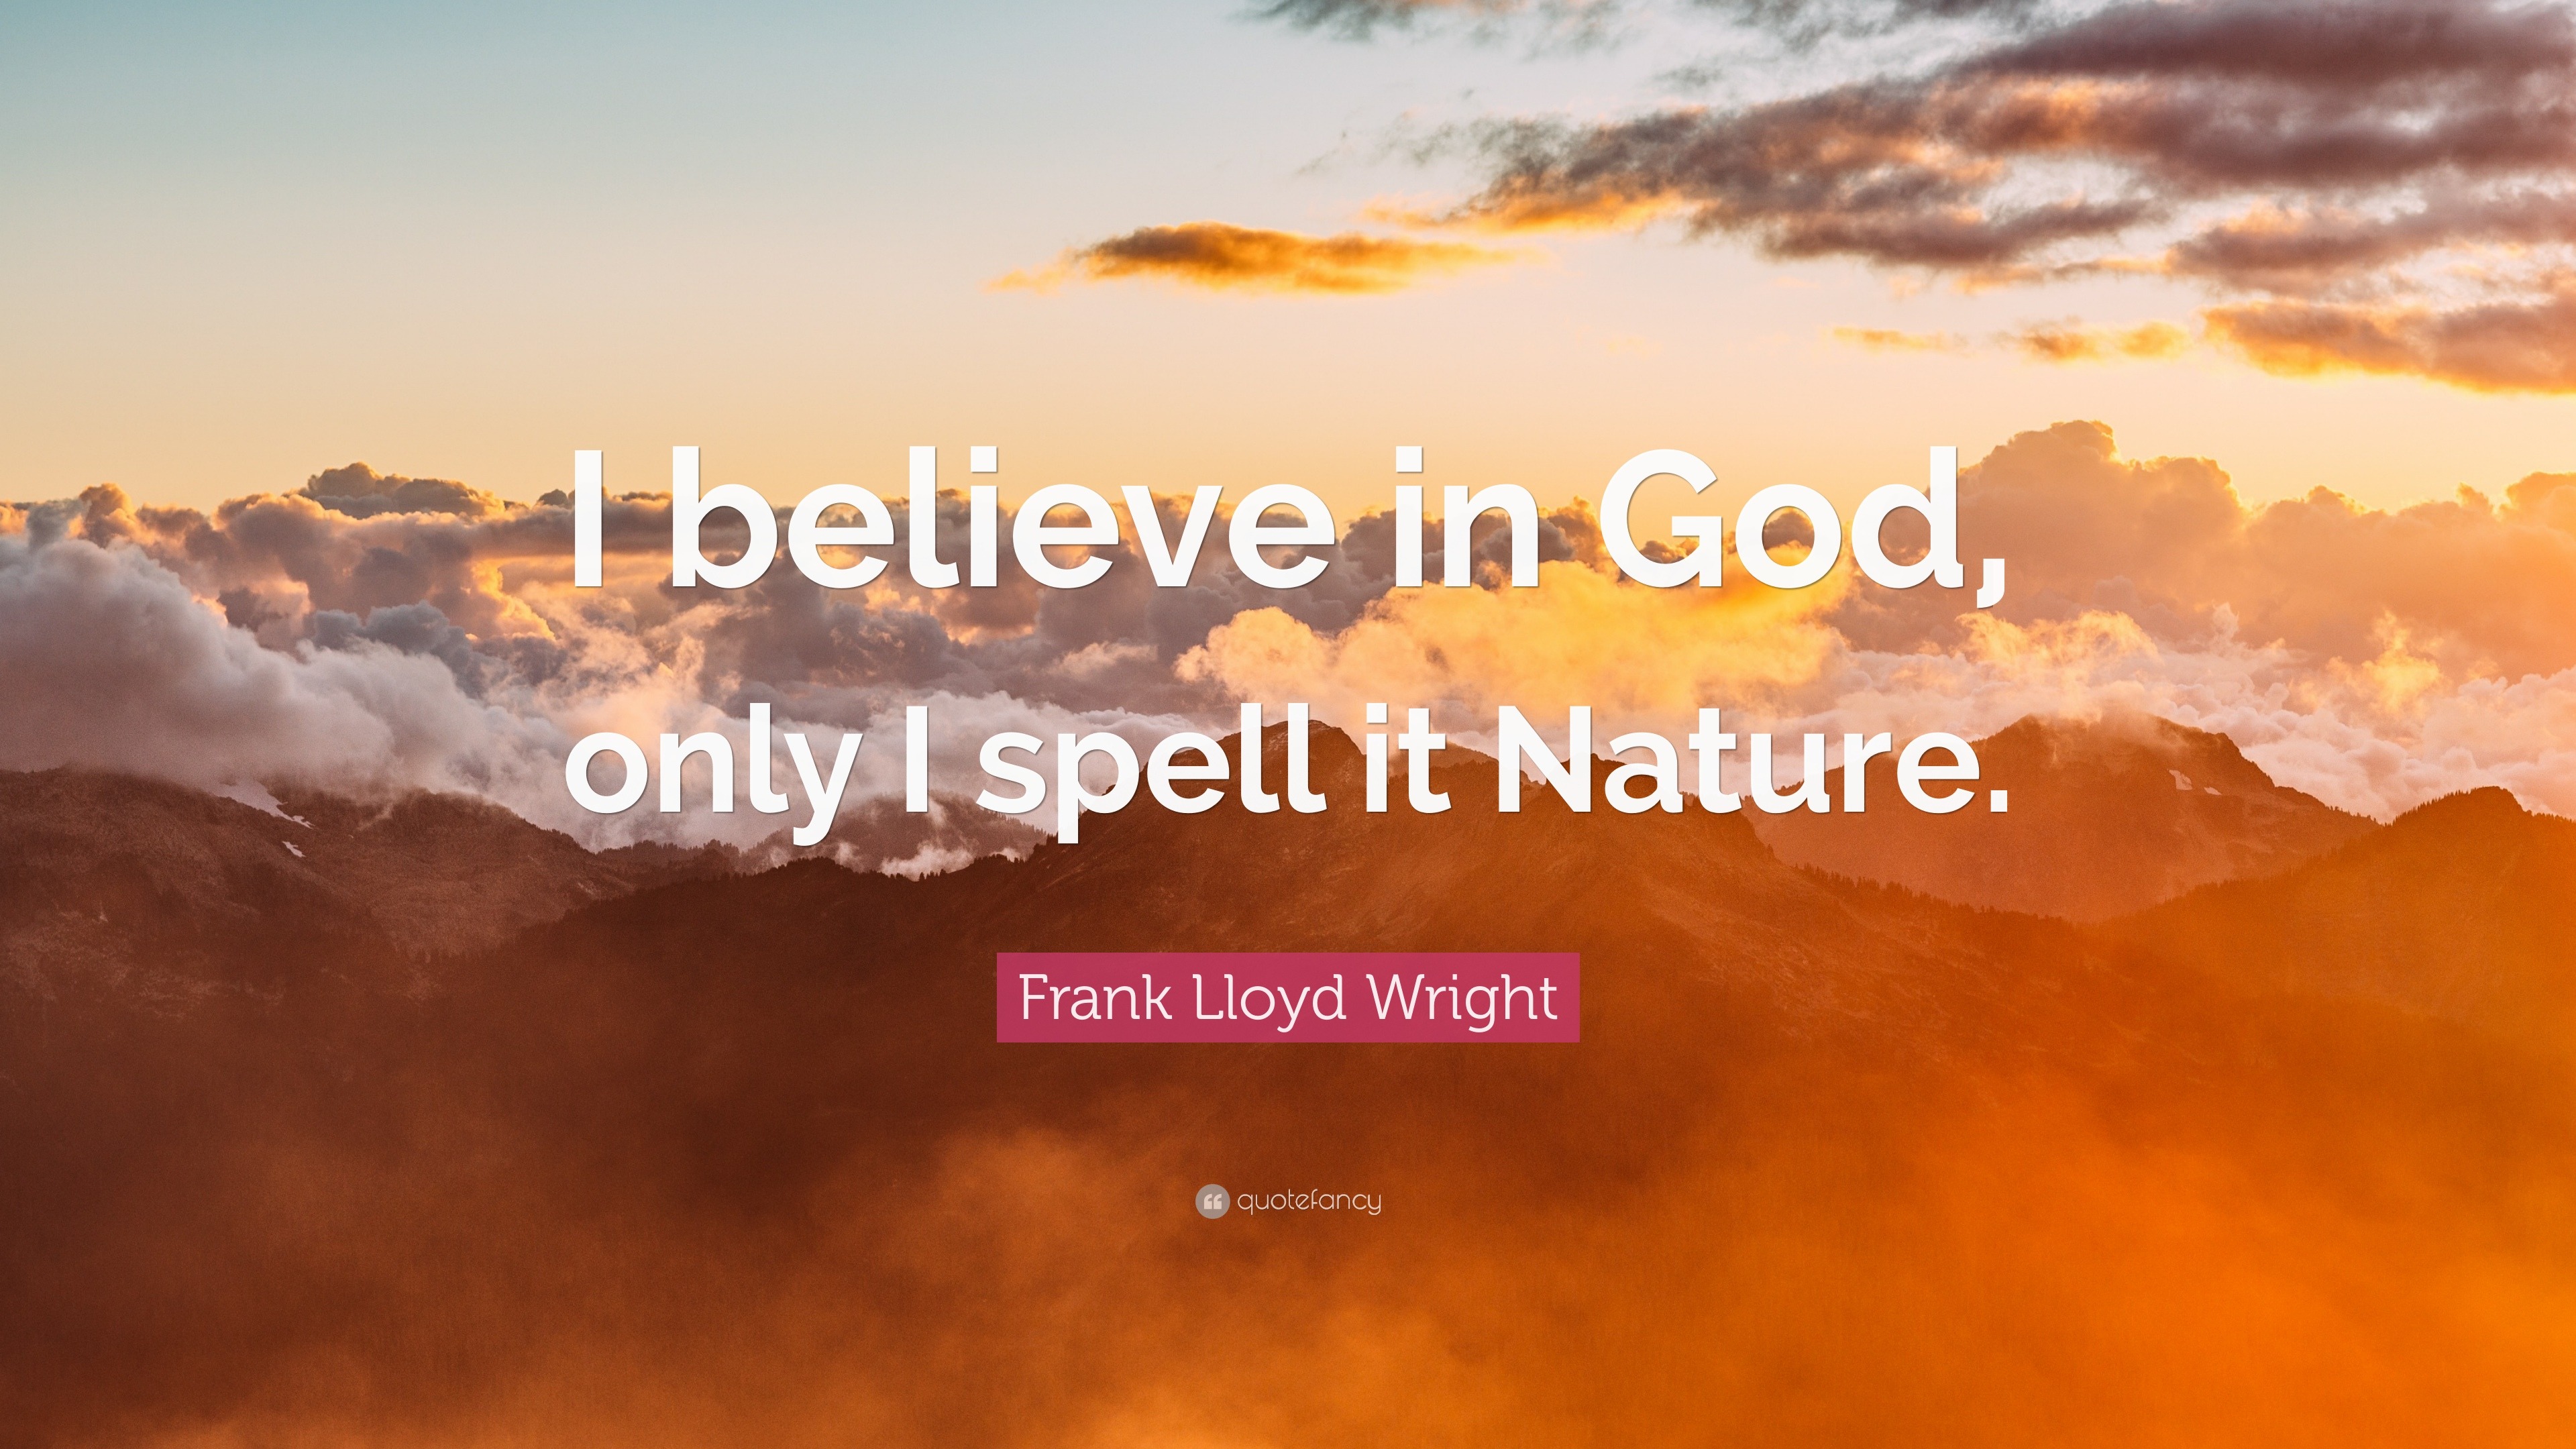 Lloyd Wright Quote: “I believe in God, only I spell it